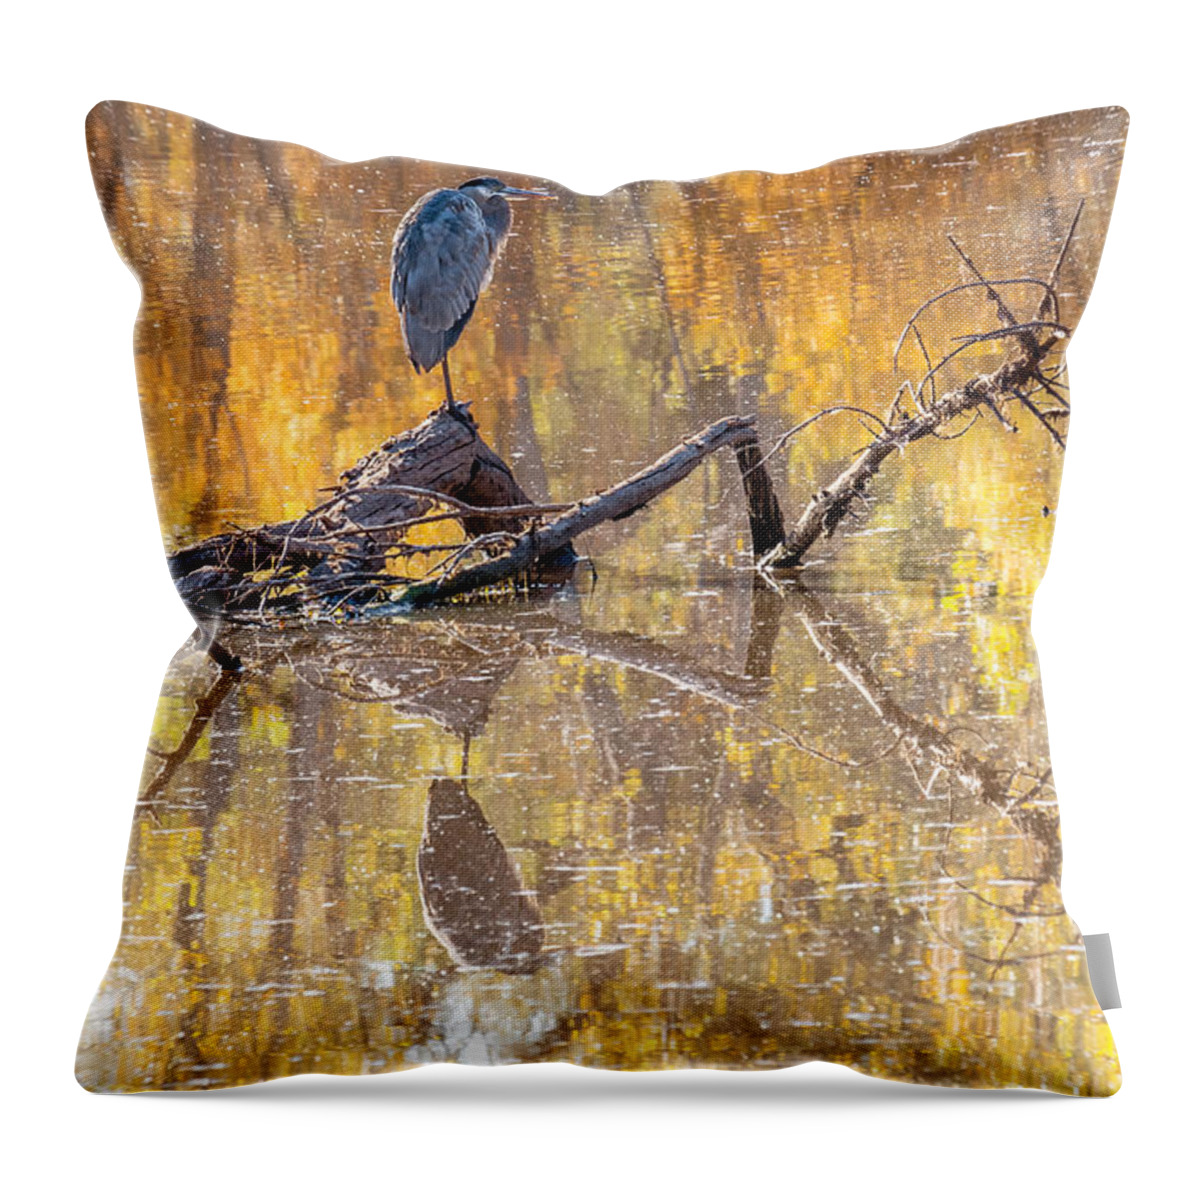 Al Andersen Throw Pillow featuring the photograph Heron Reflecting by Al Andersen